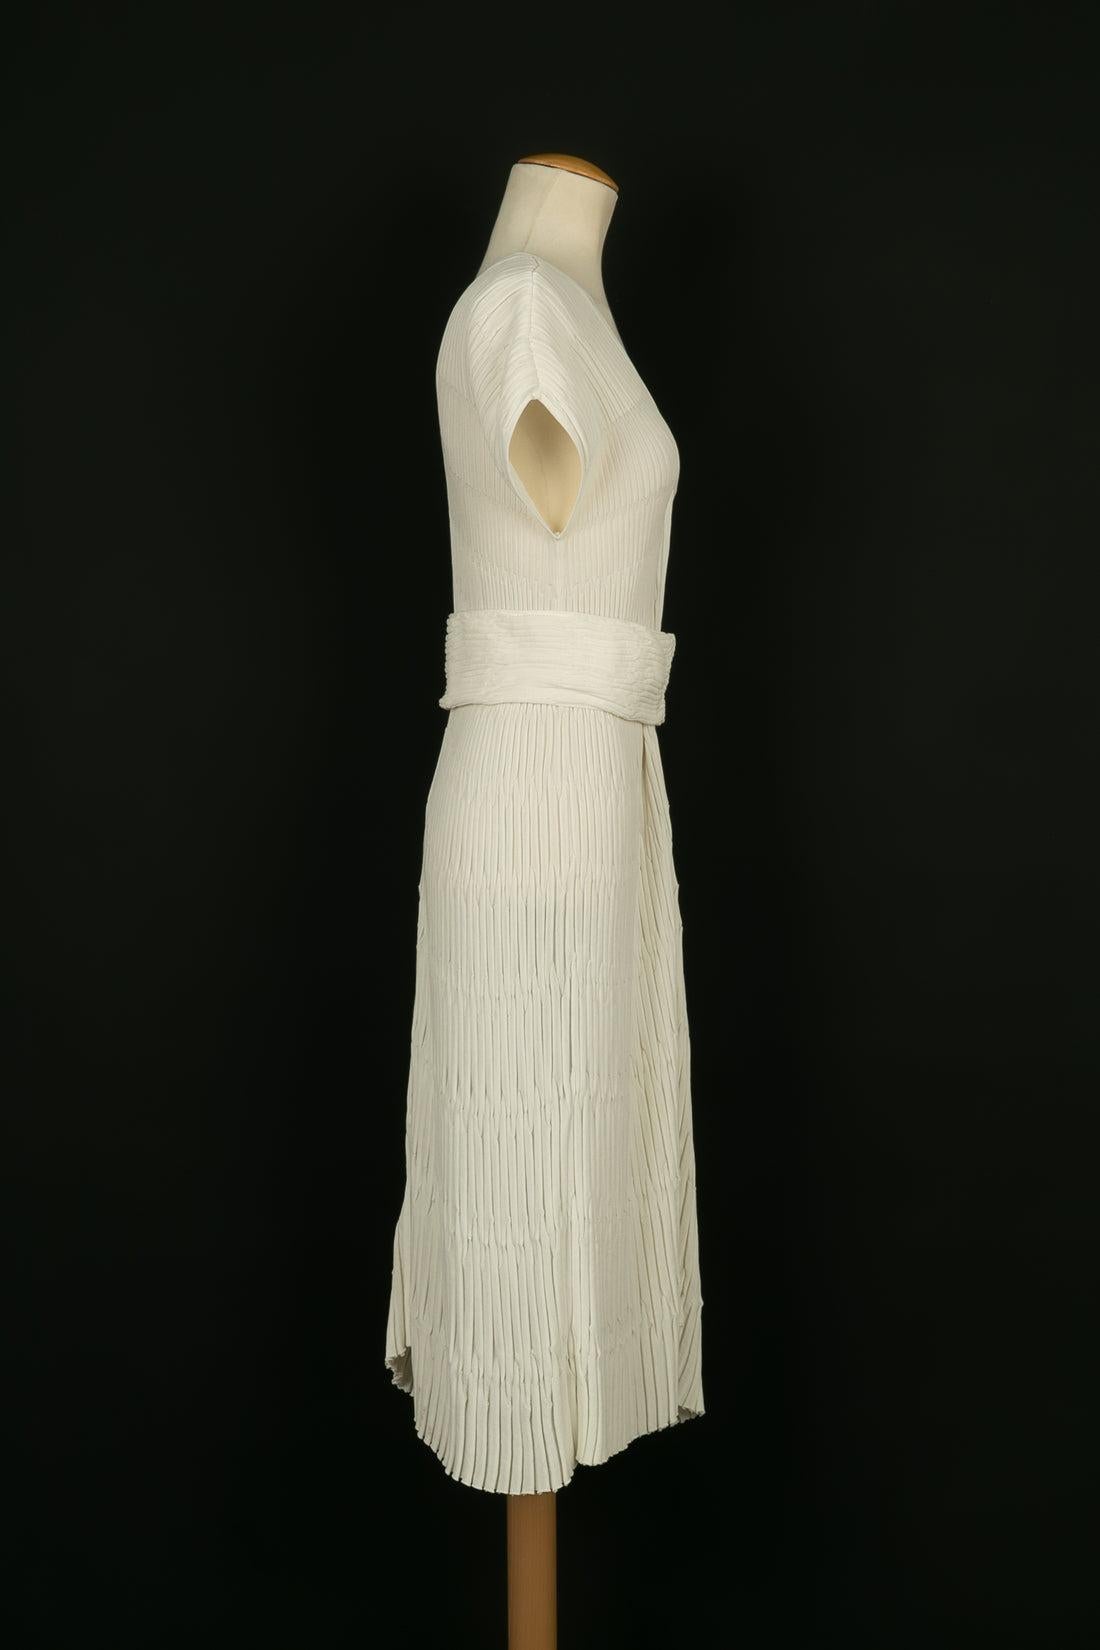 Women's Chanel Dress in White Cotton Blend, Zip in Silver Plated Metal For Sale